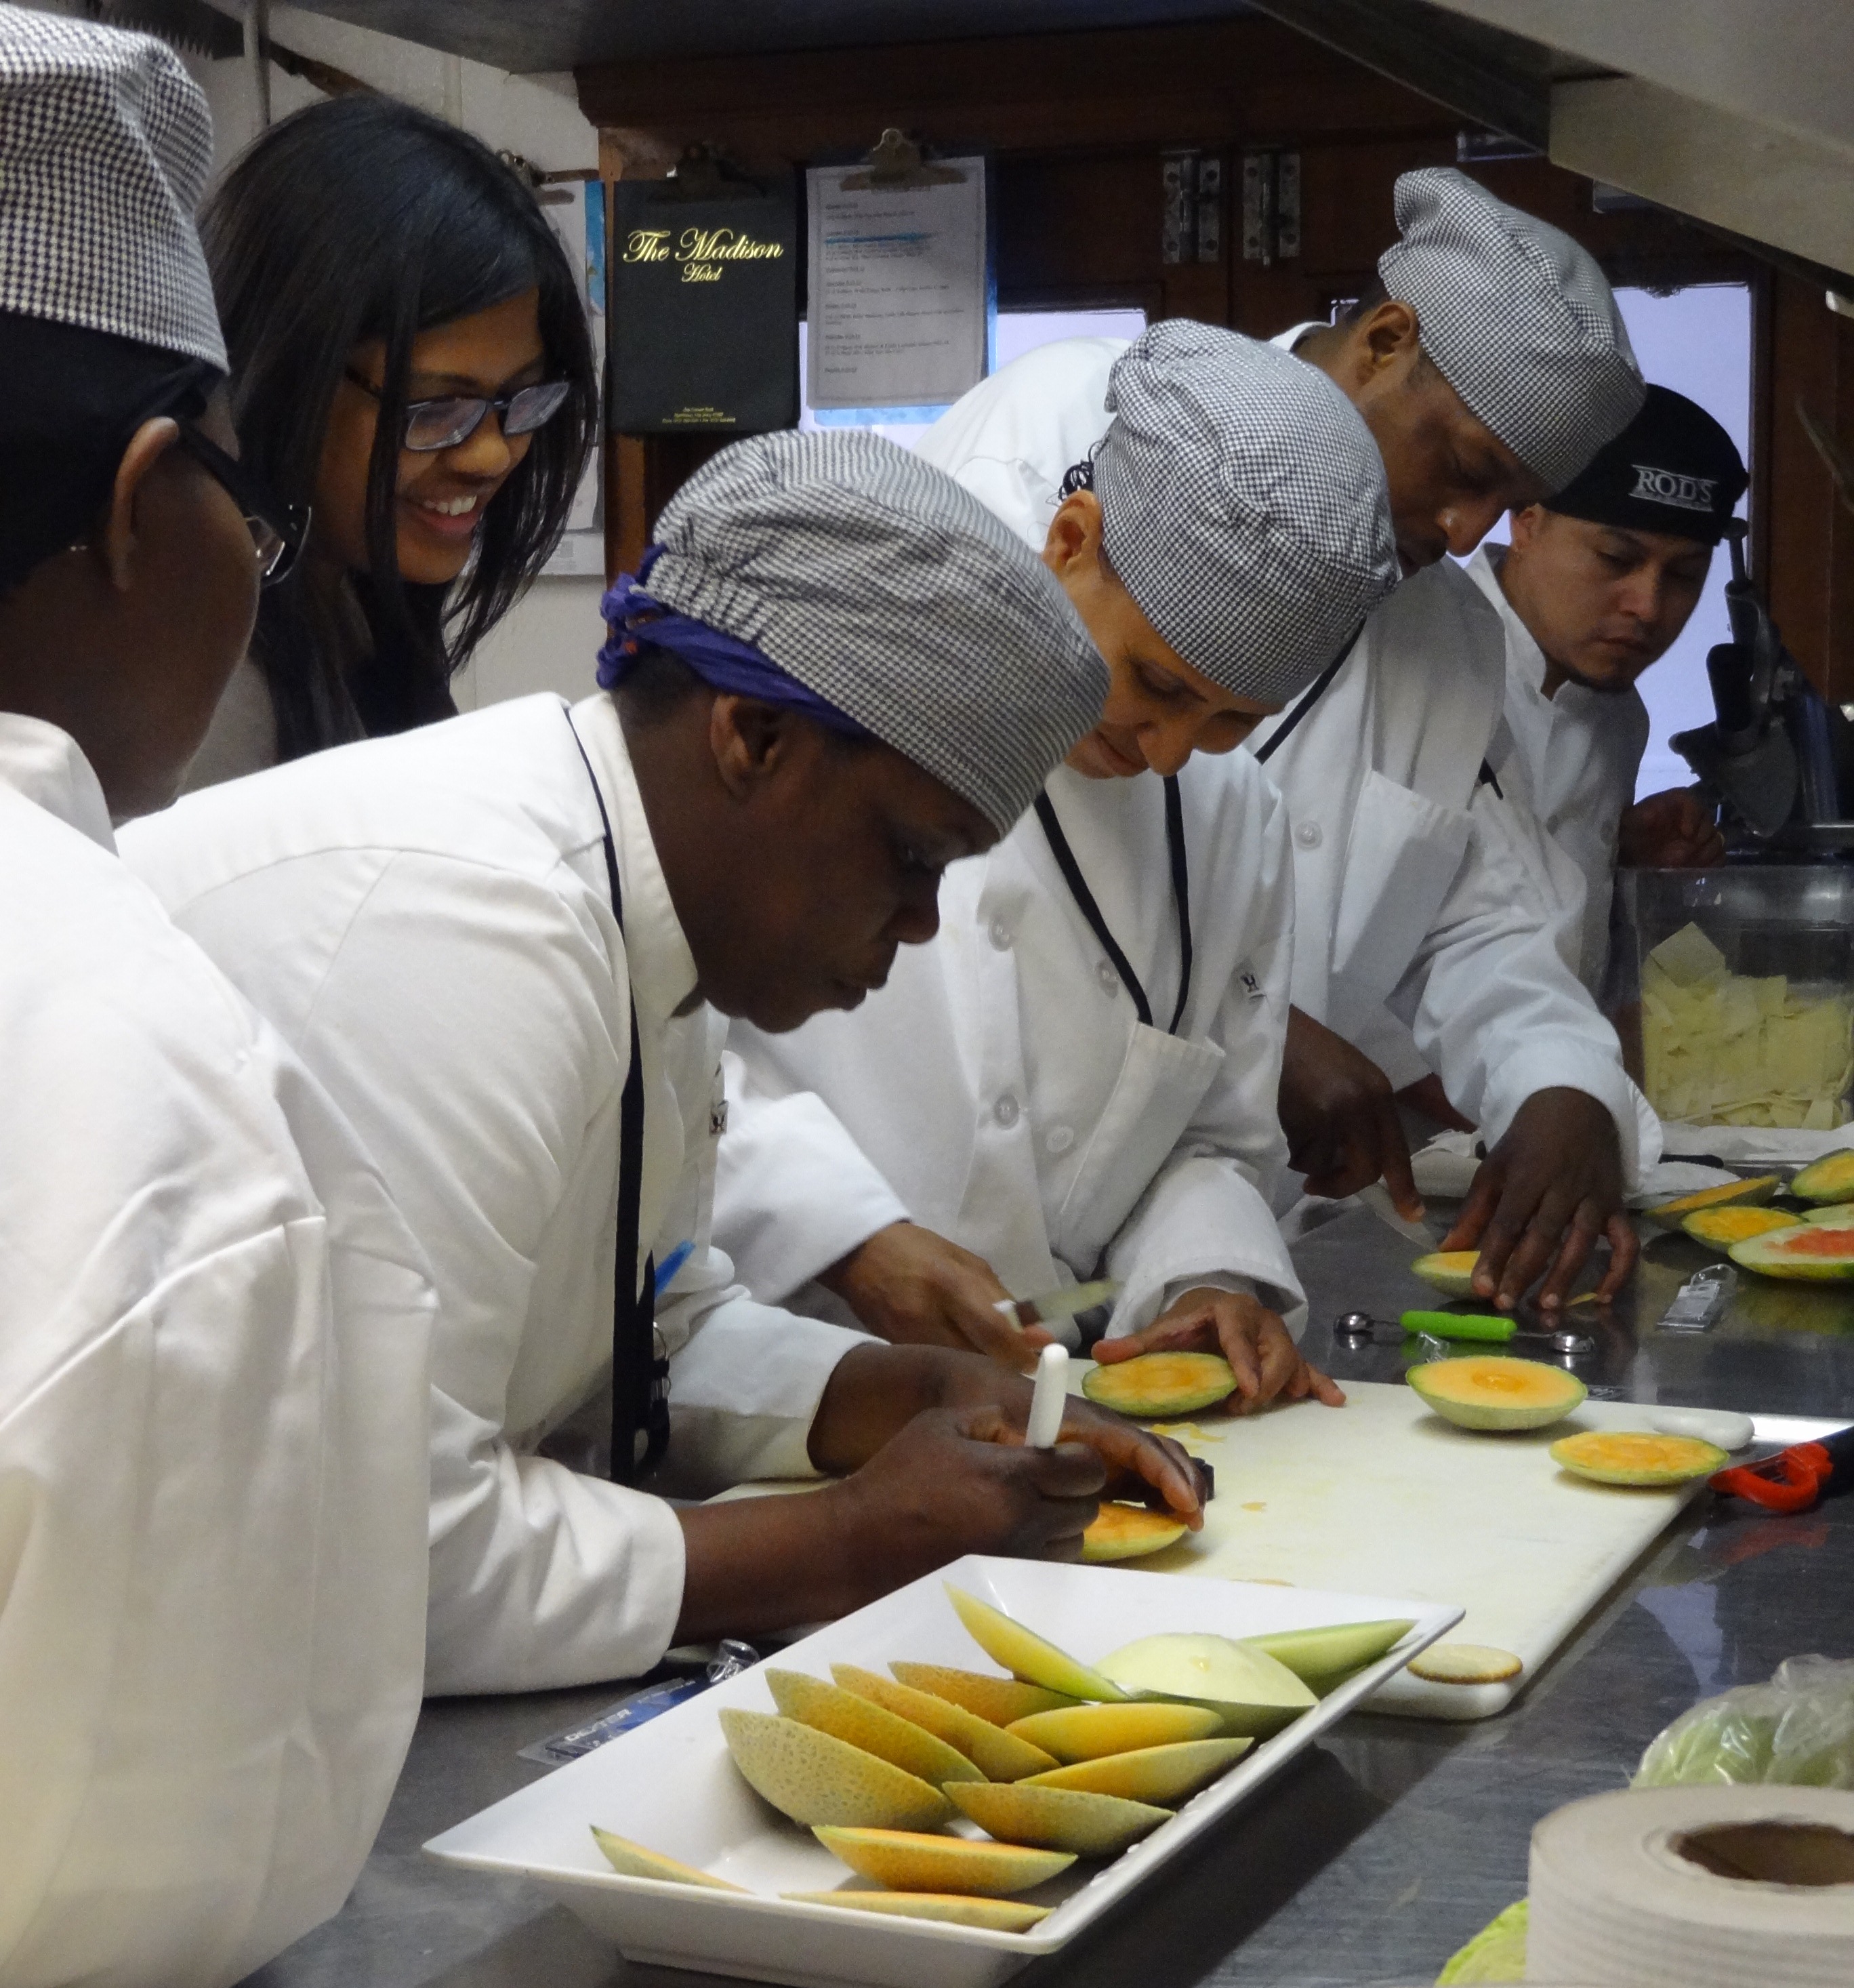 Culinary students try their hand at fruit carving